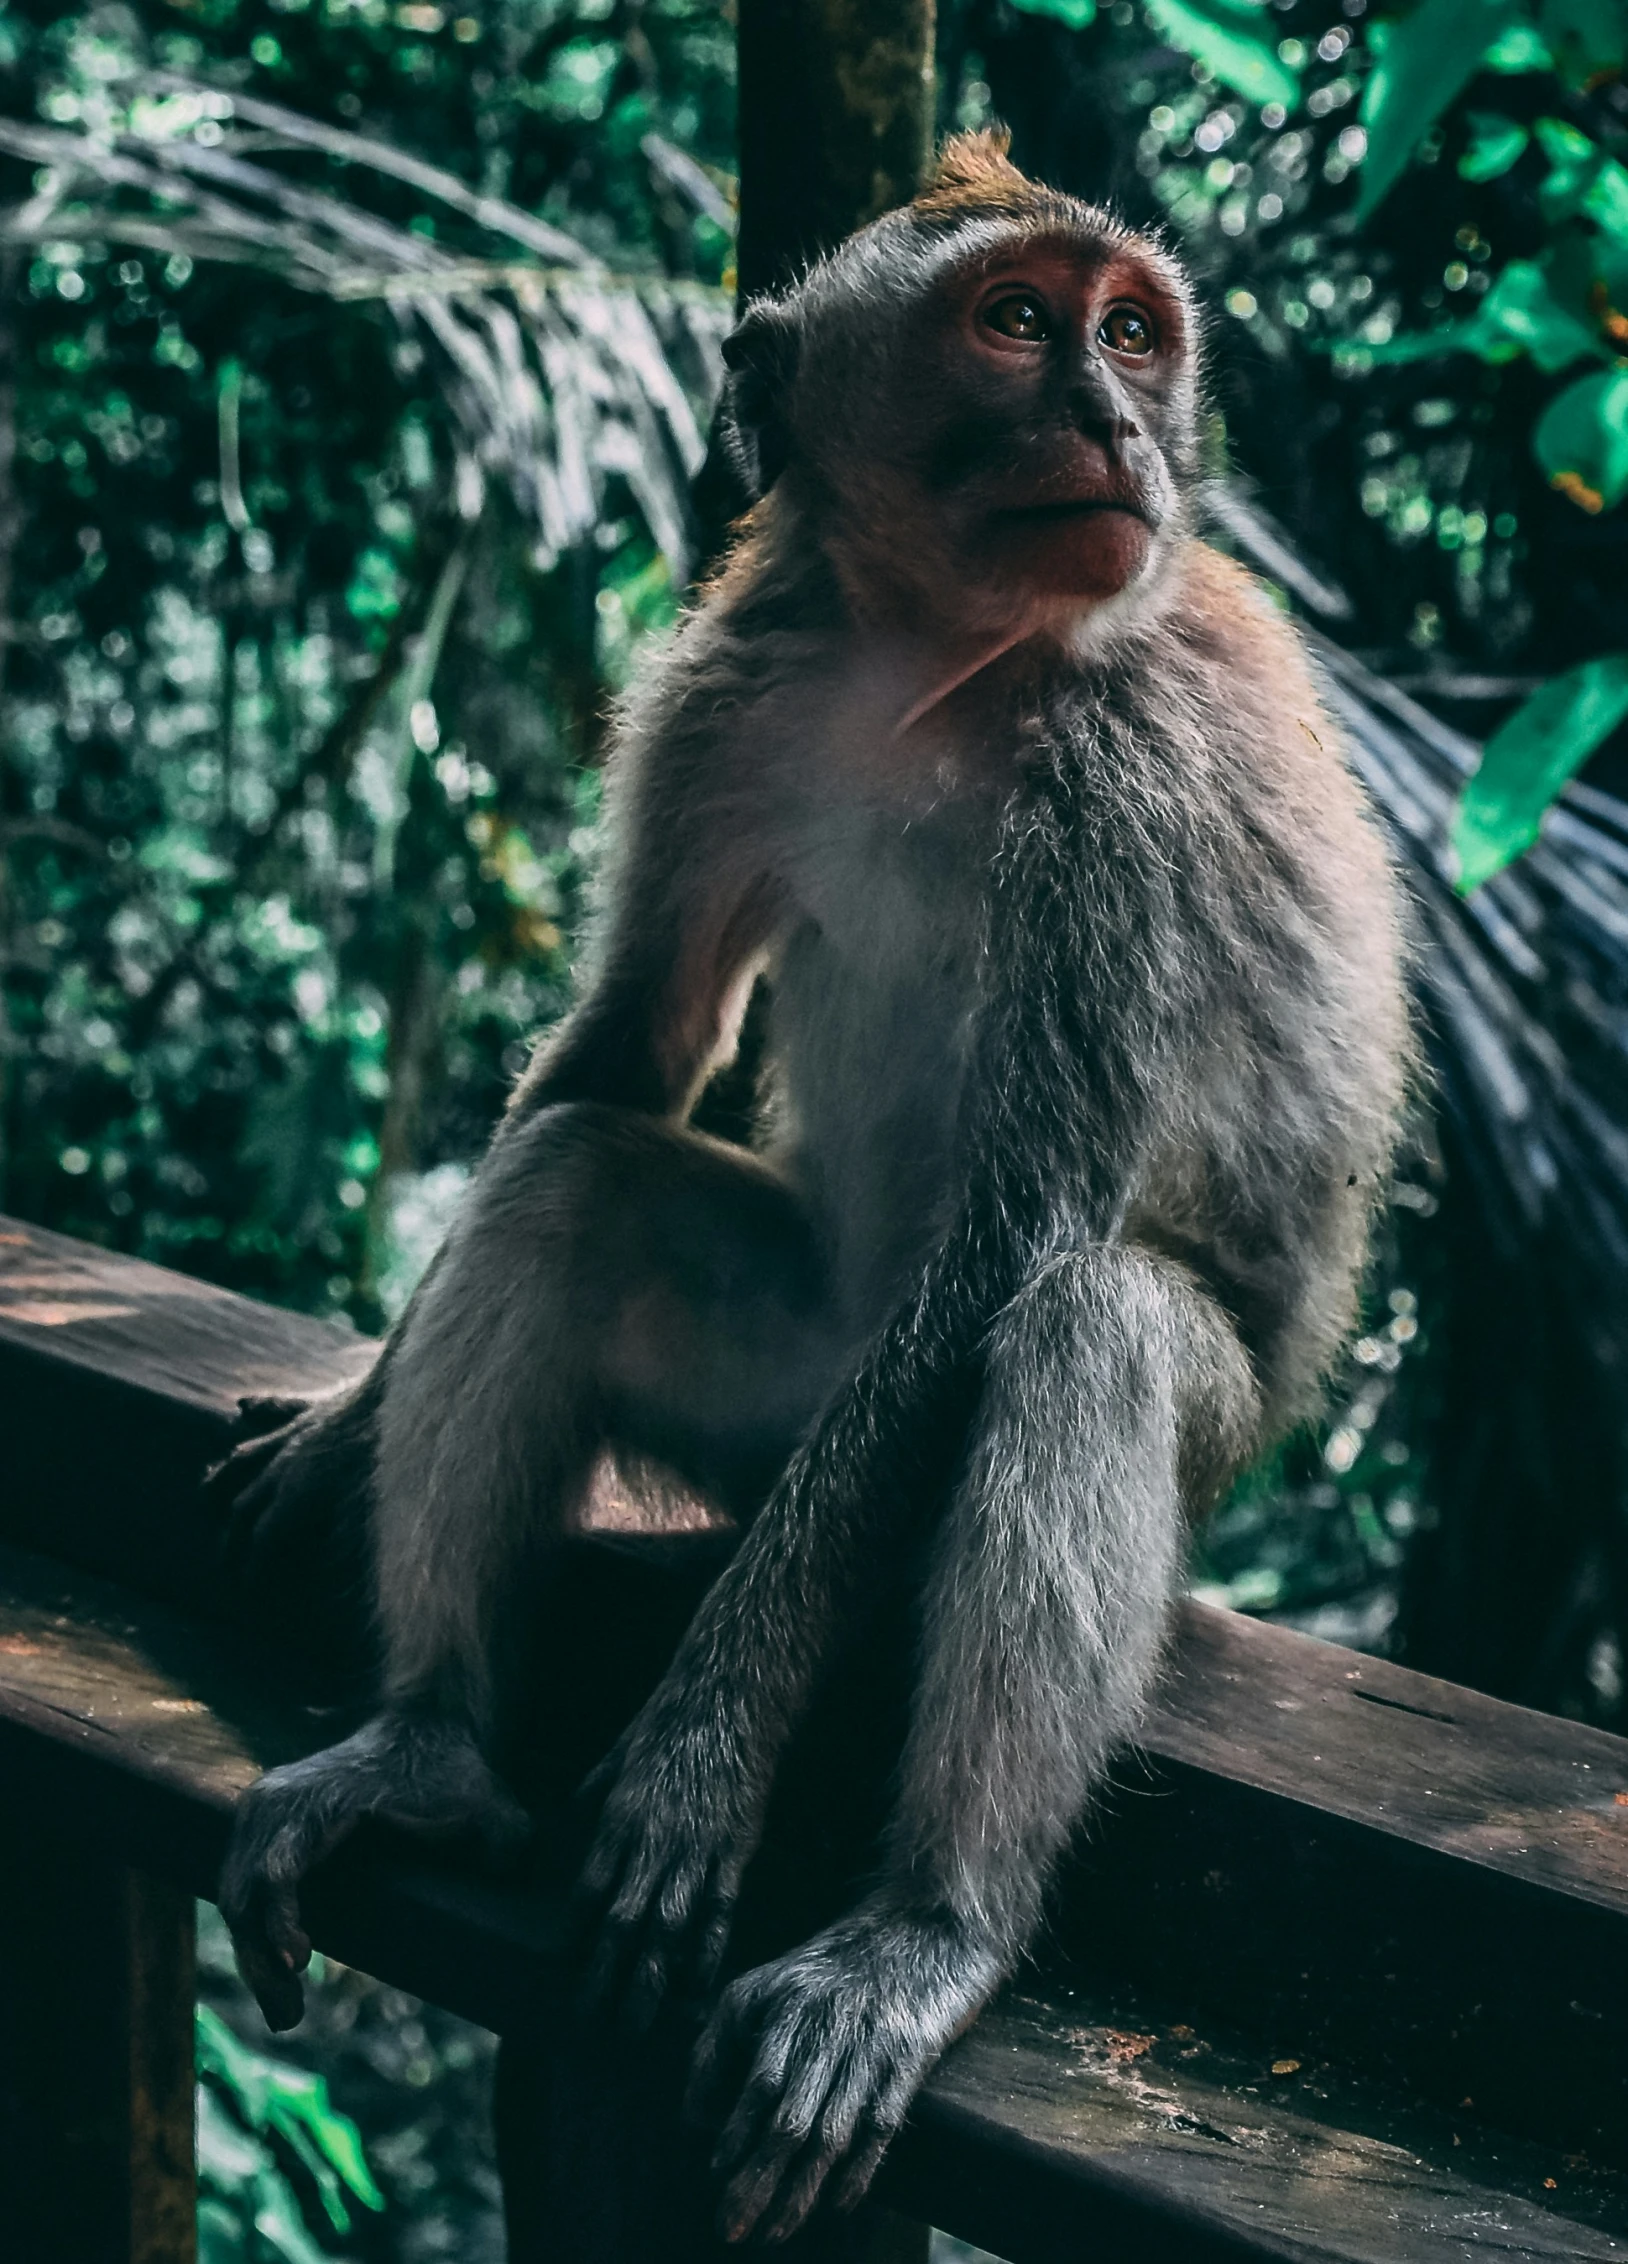 a small monkey sitting on top of a wooden railing